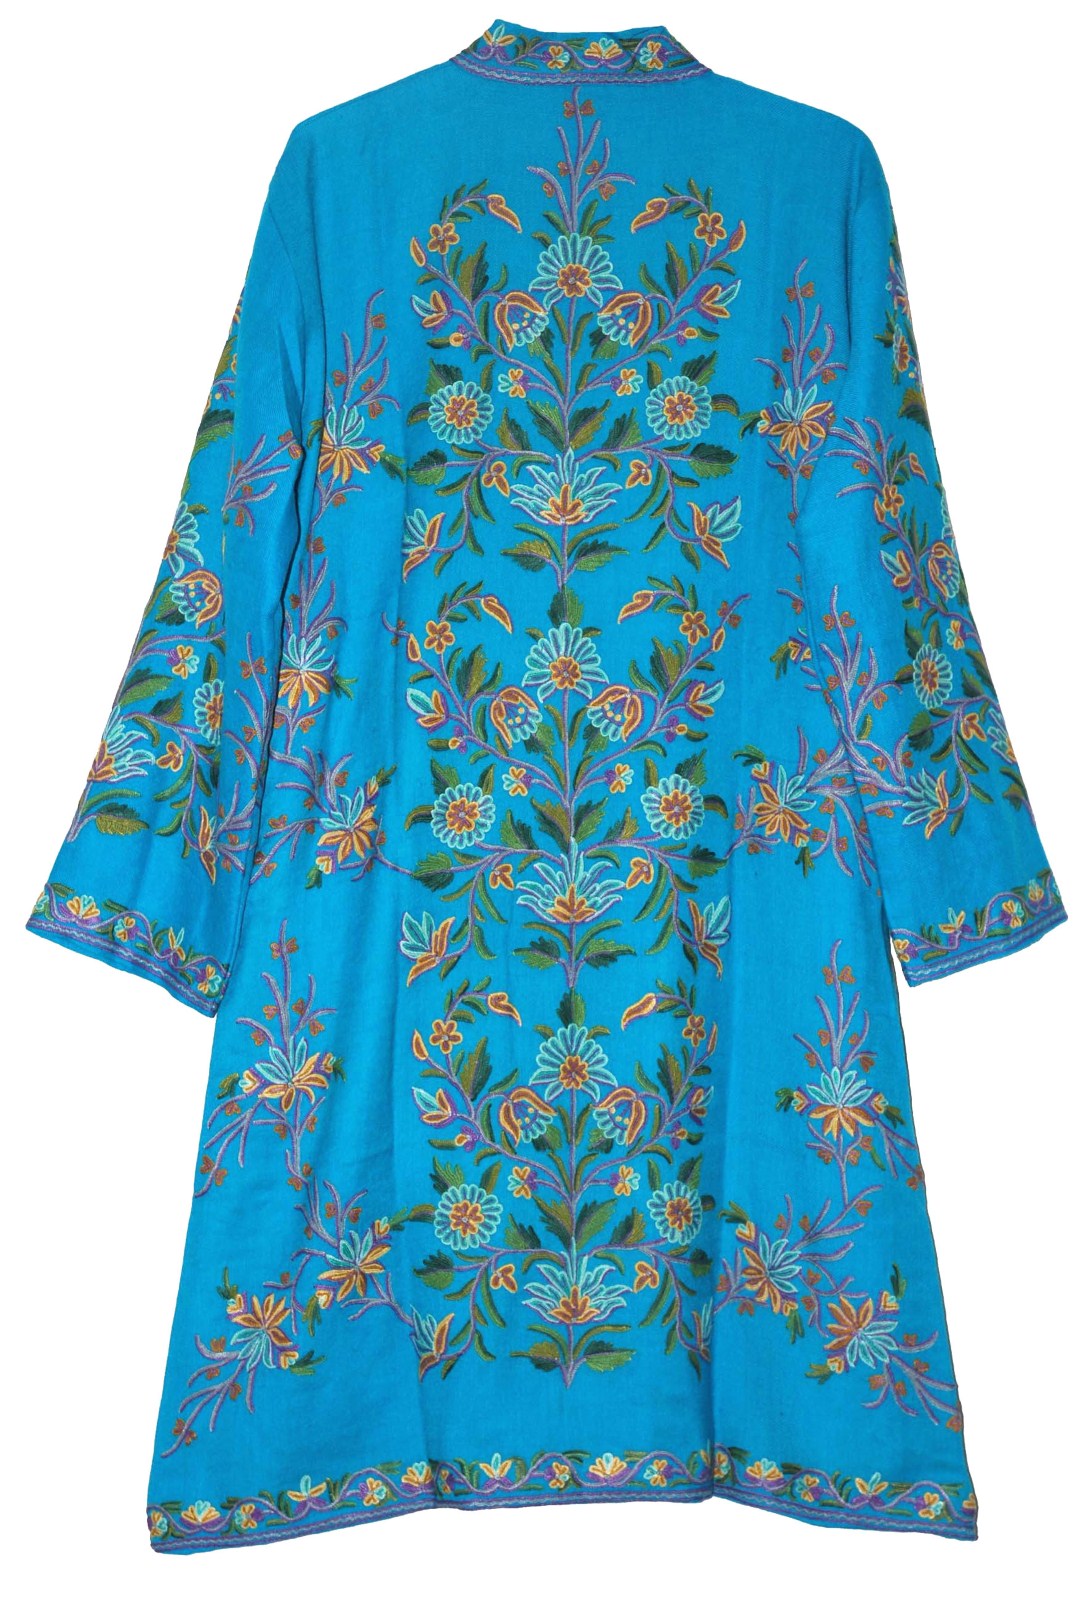 Woolen Embroidered Coat Long Jacket Sky Blue, Blue and Green Embroidery #AO-171